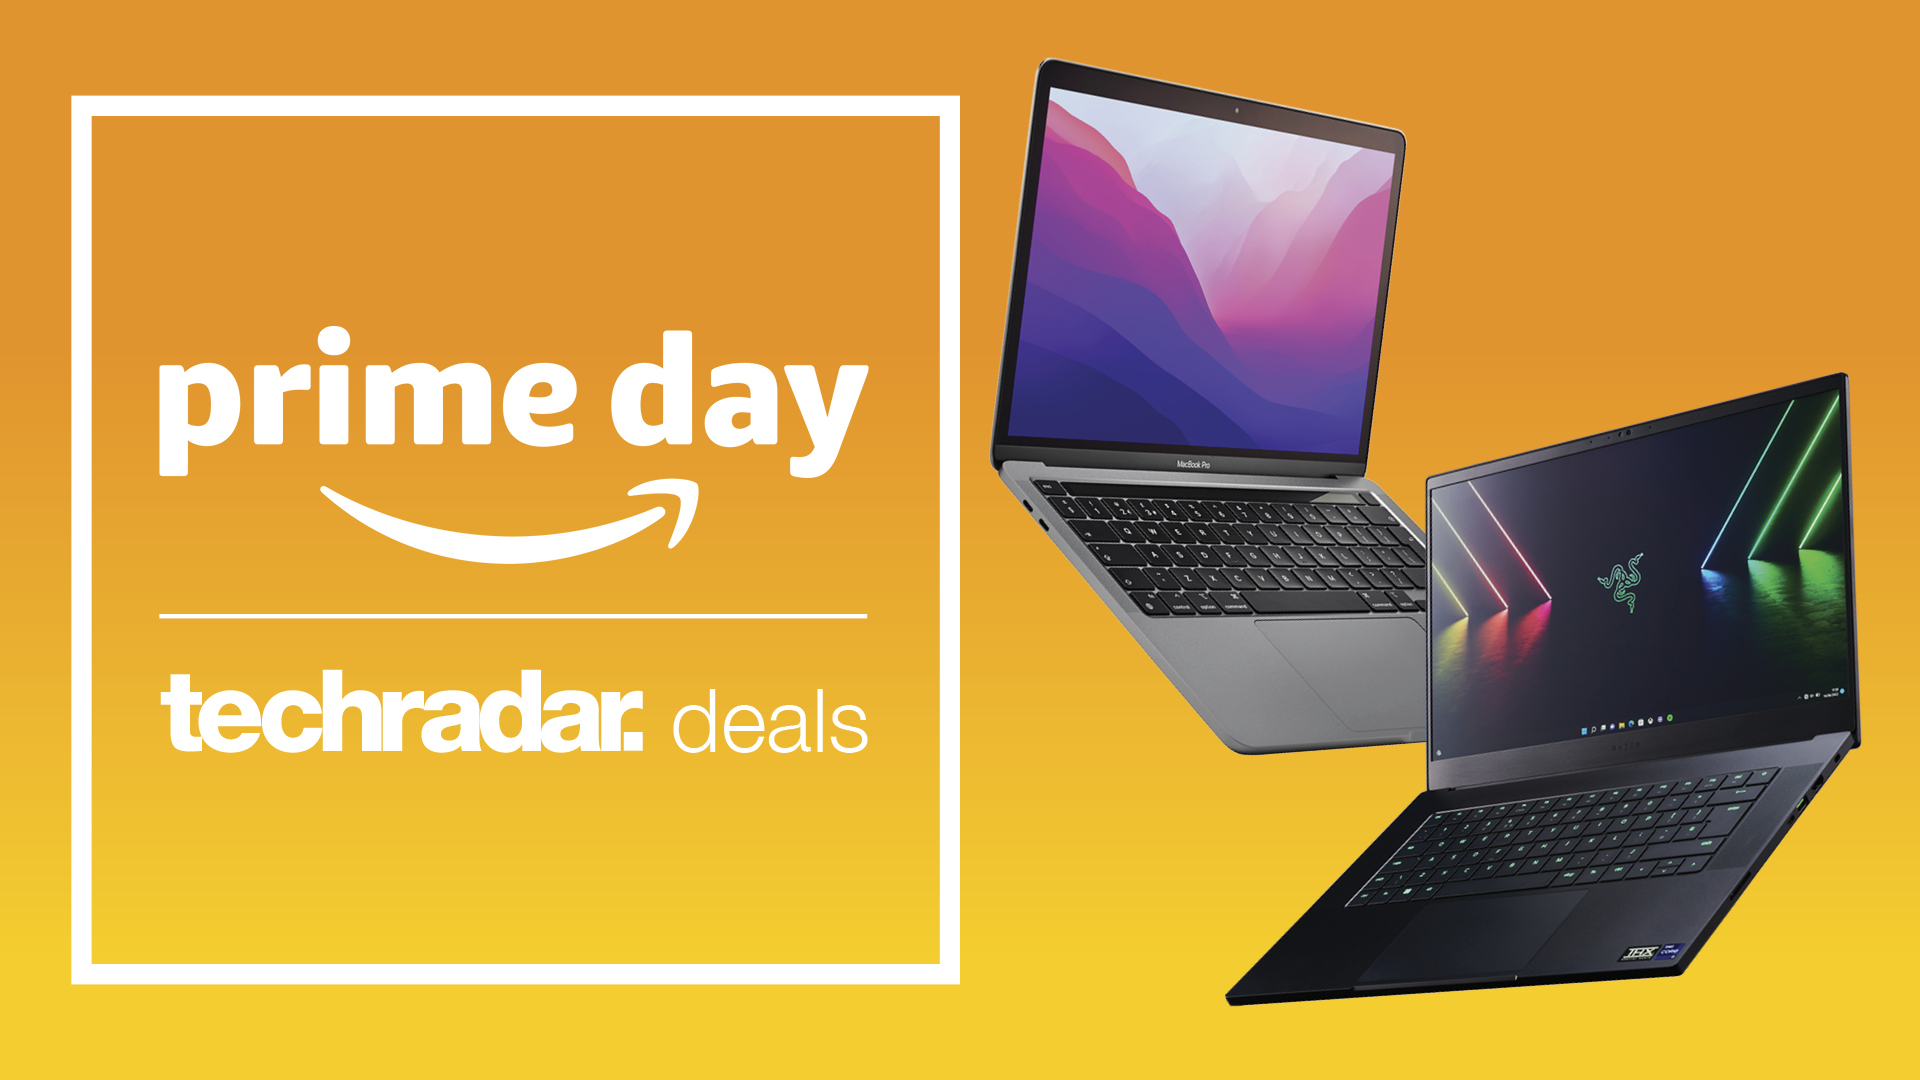 Amazon Prime Day laptop deals header image with two laptops on yellow background